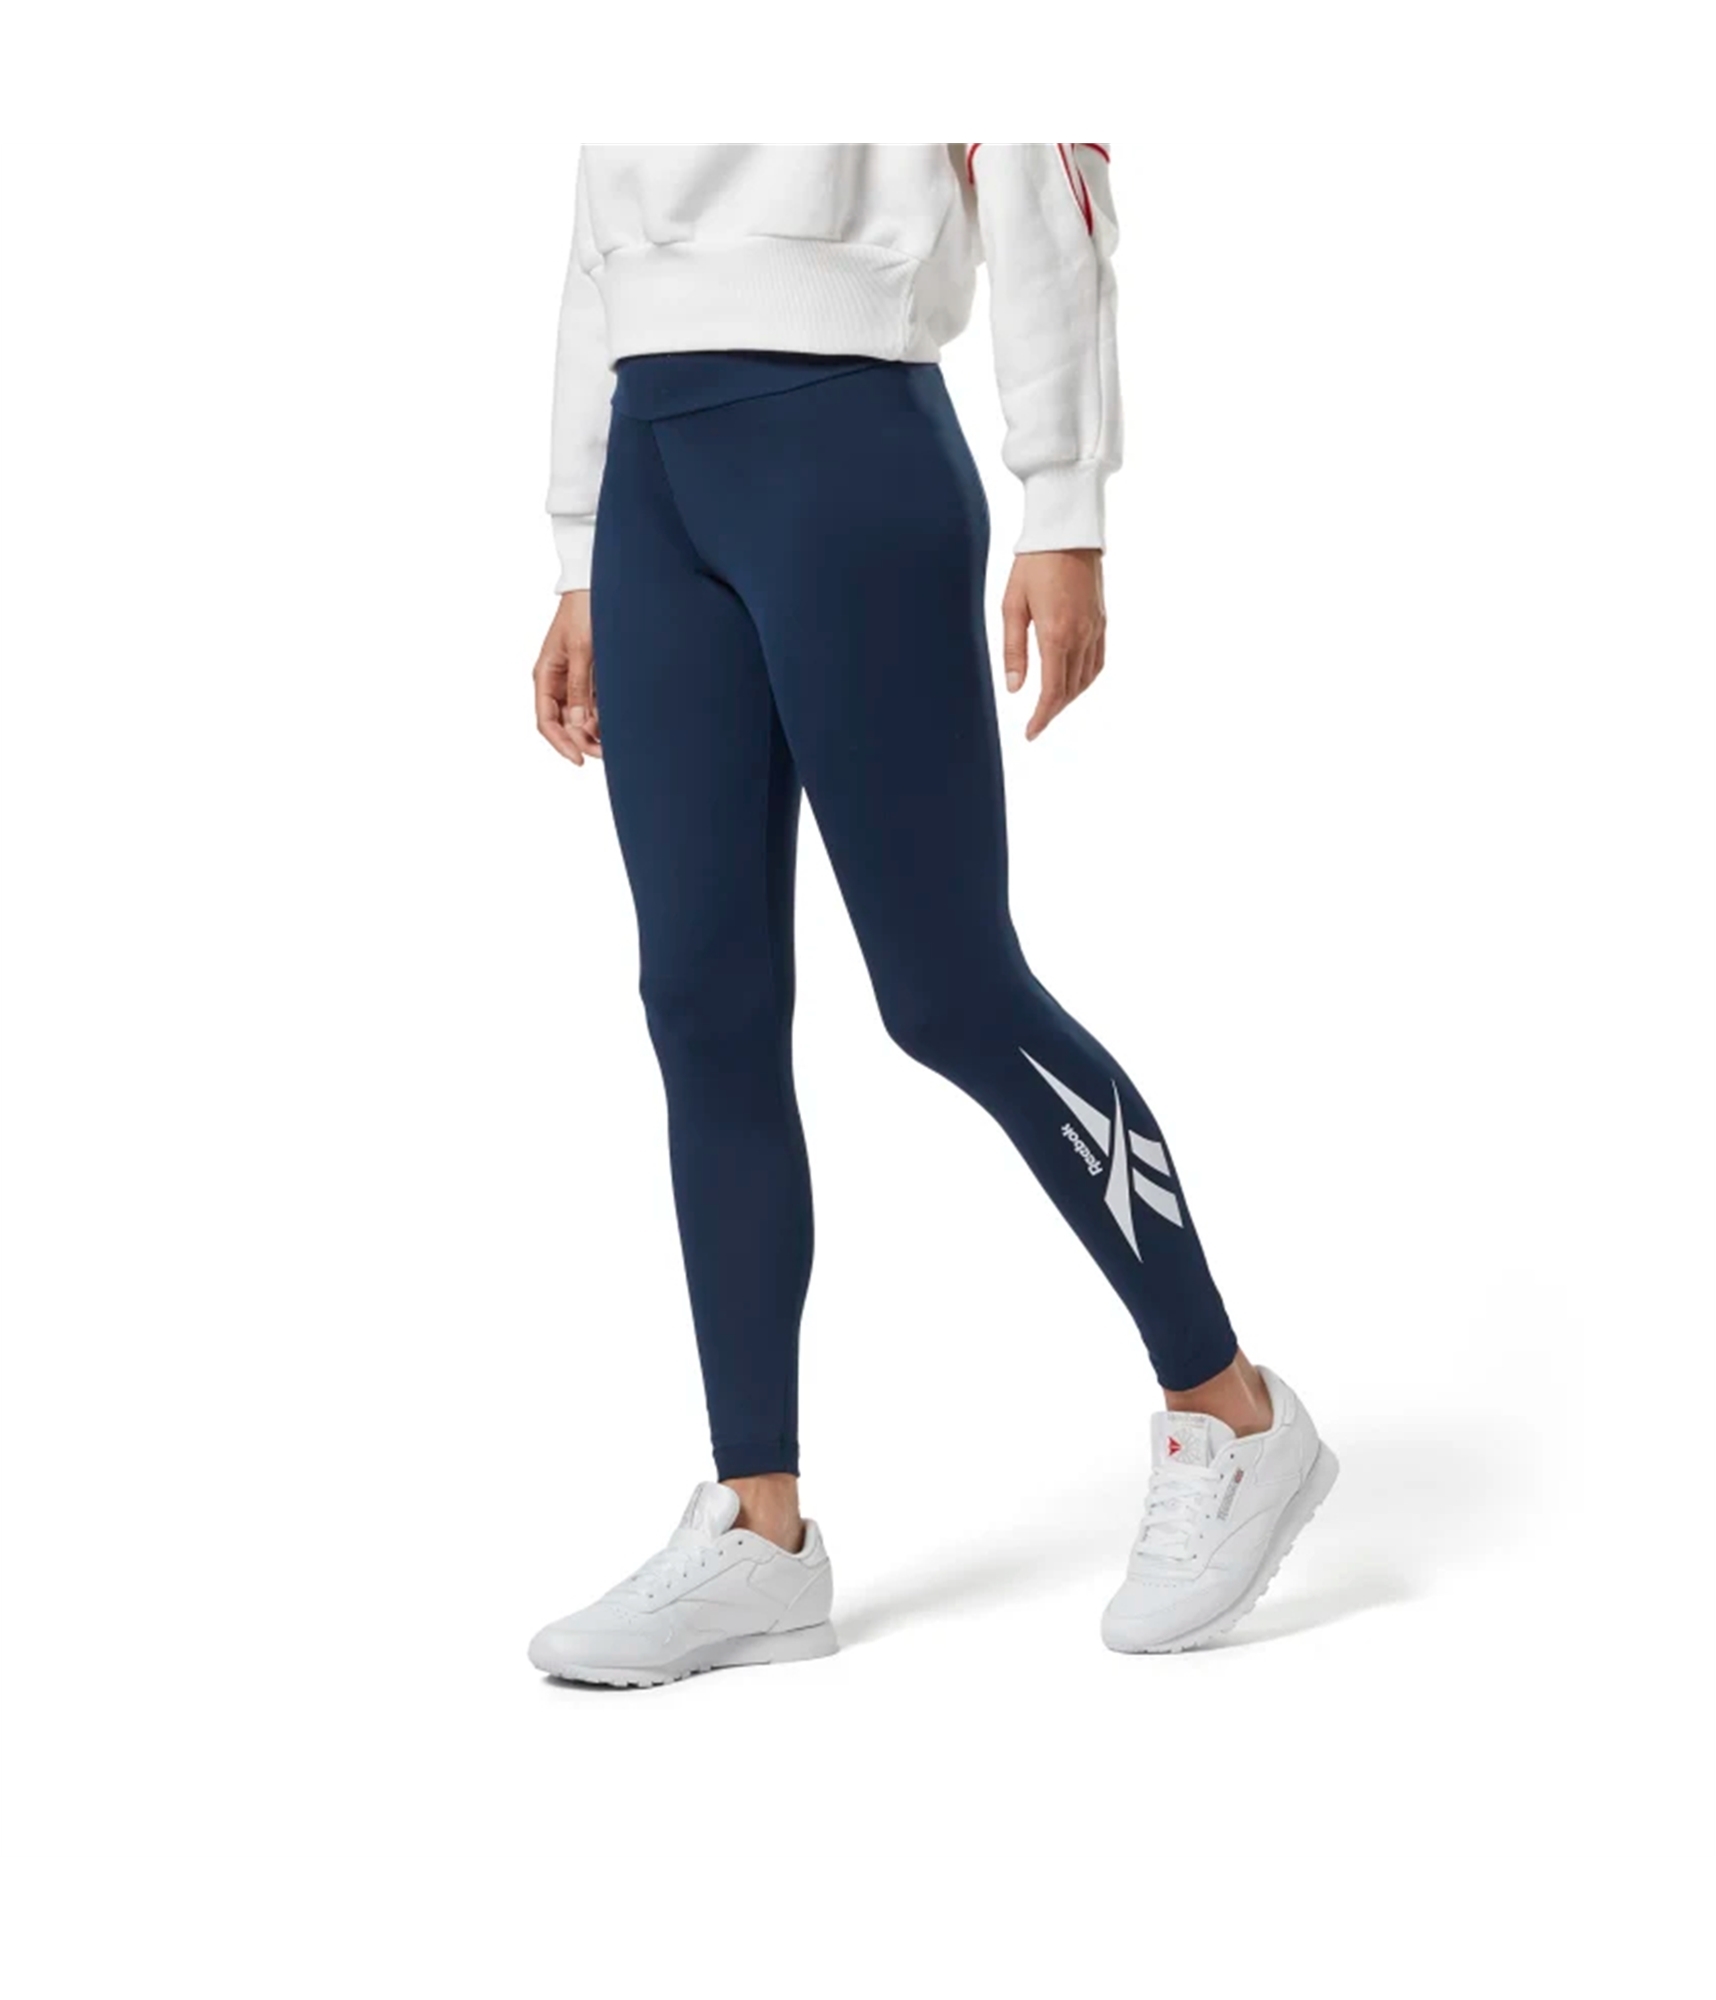 Buy a Womens Reebok Vector Logo Compression Athletic Pants Online | TagsWeekly.com